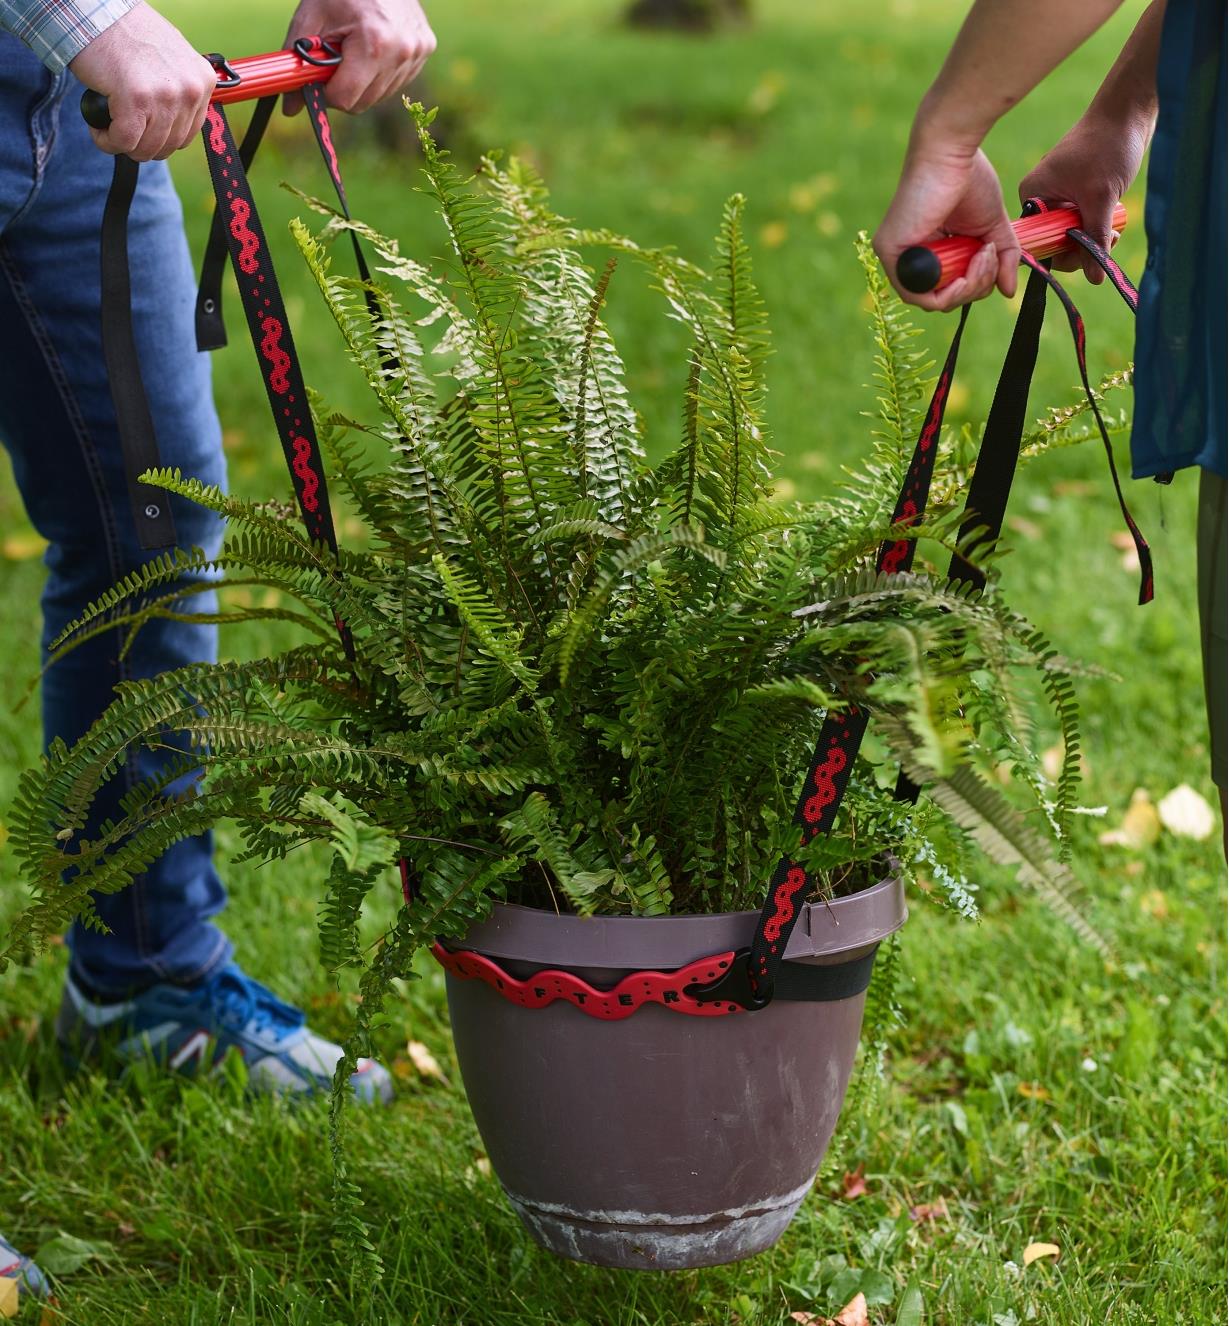 Two people using a pot lifter to lift a large potted plant